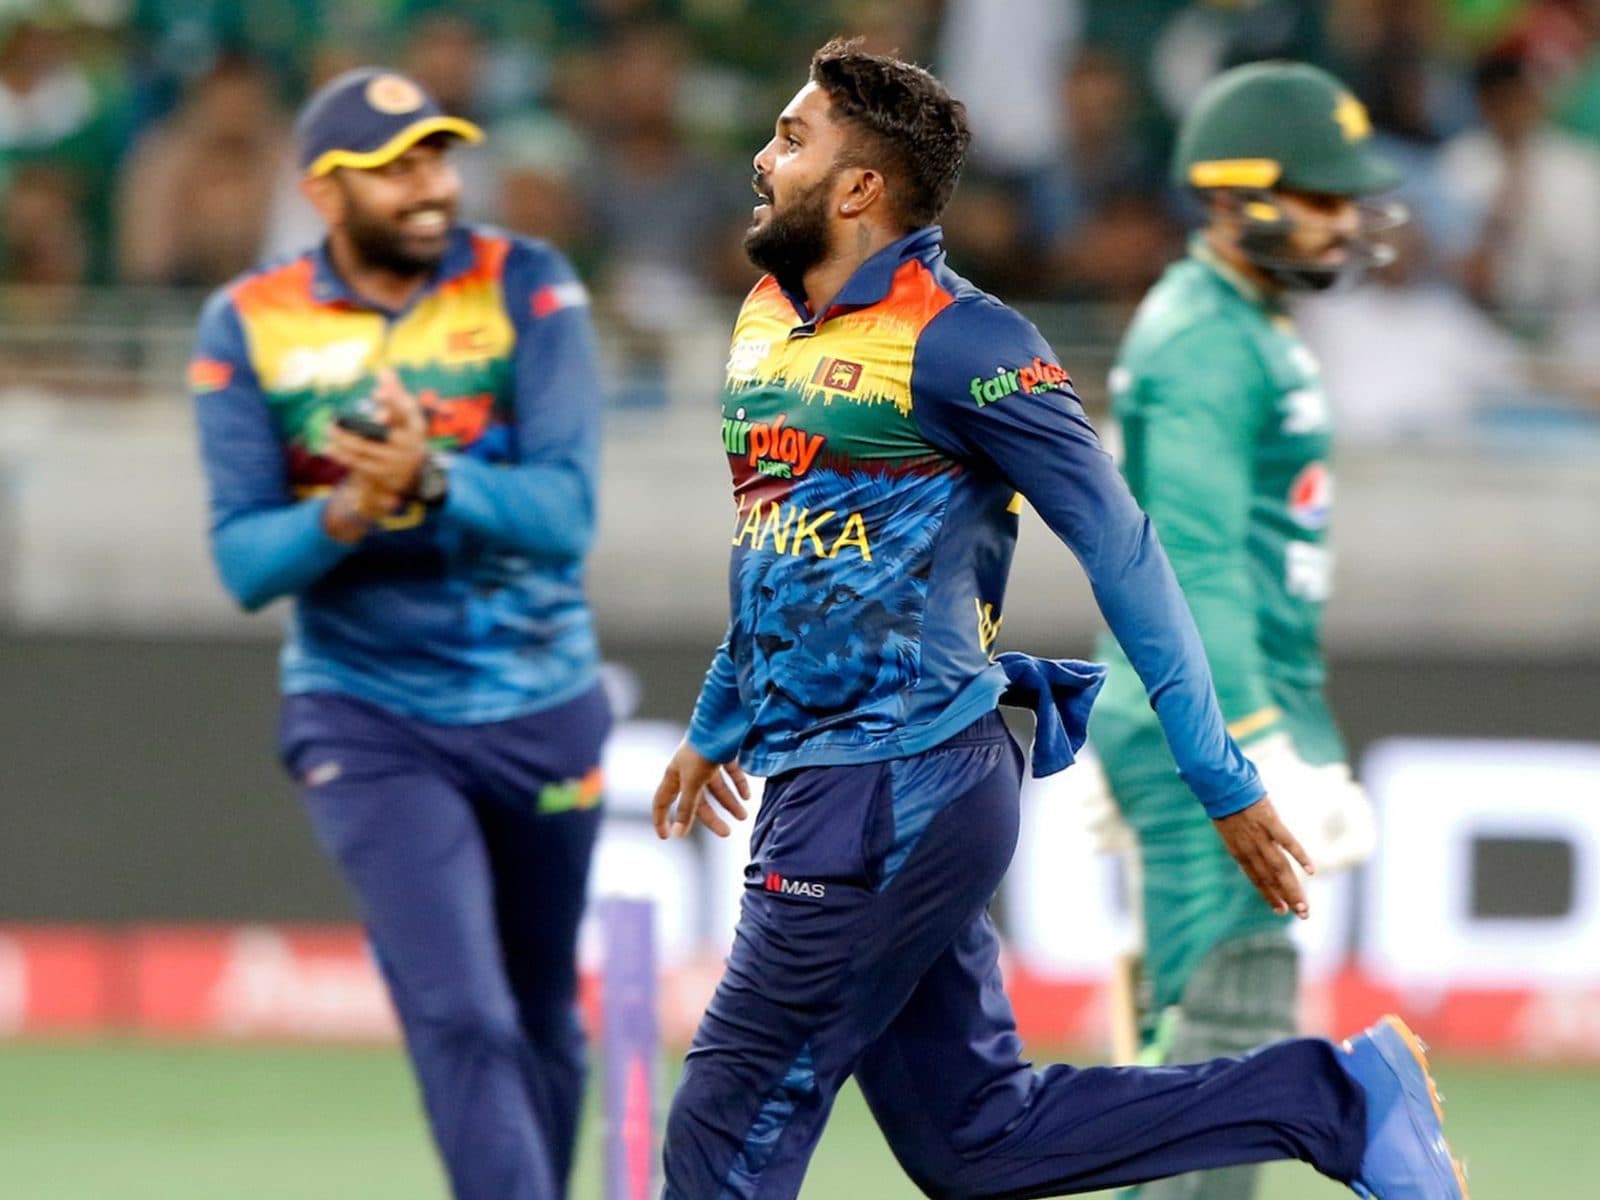 Asia Cup 2022 Final Never-say-die Sri Lanka Up Against Fiery Pakistan in Fight for the Title